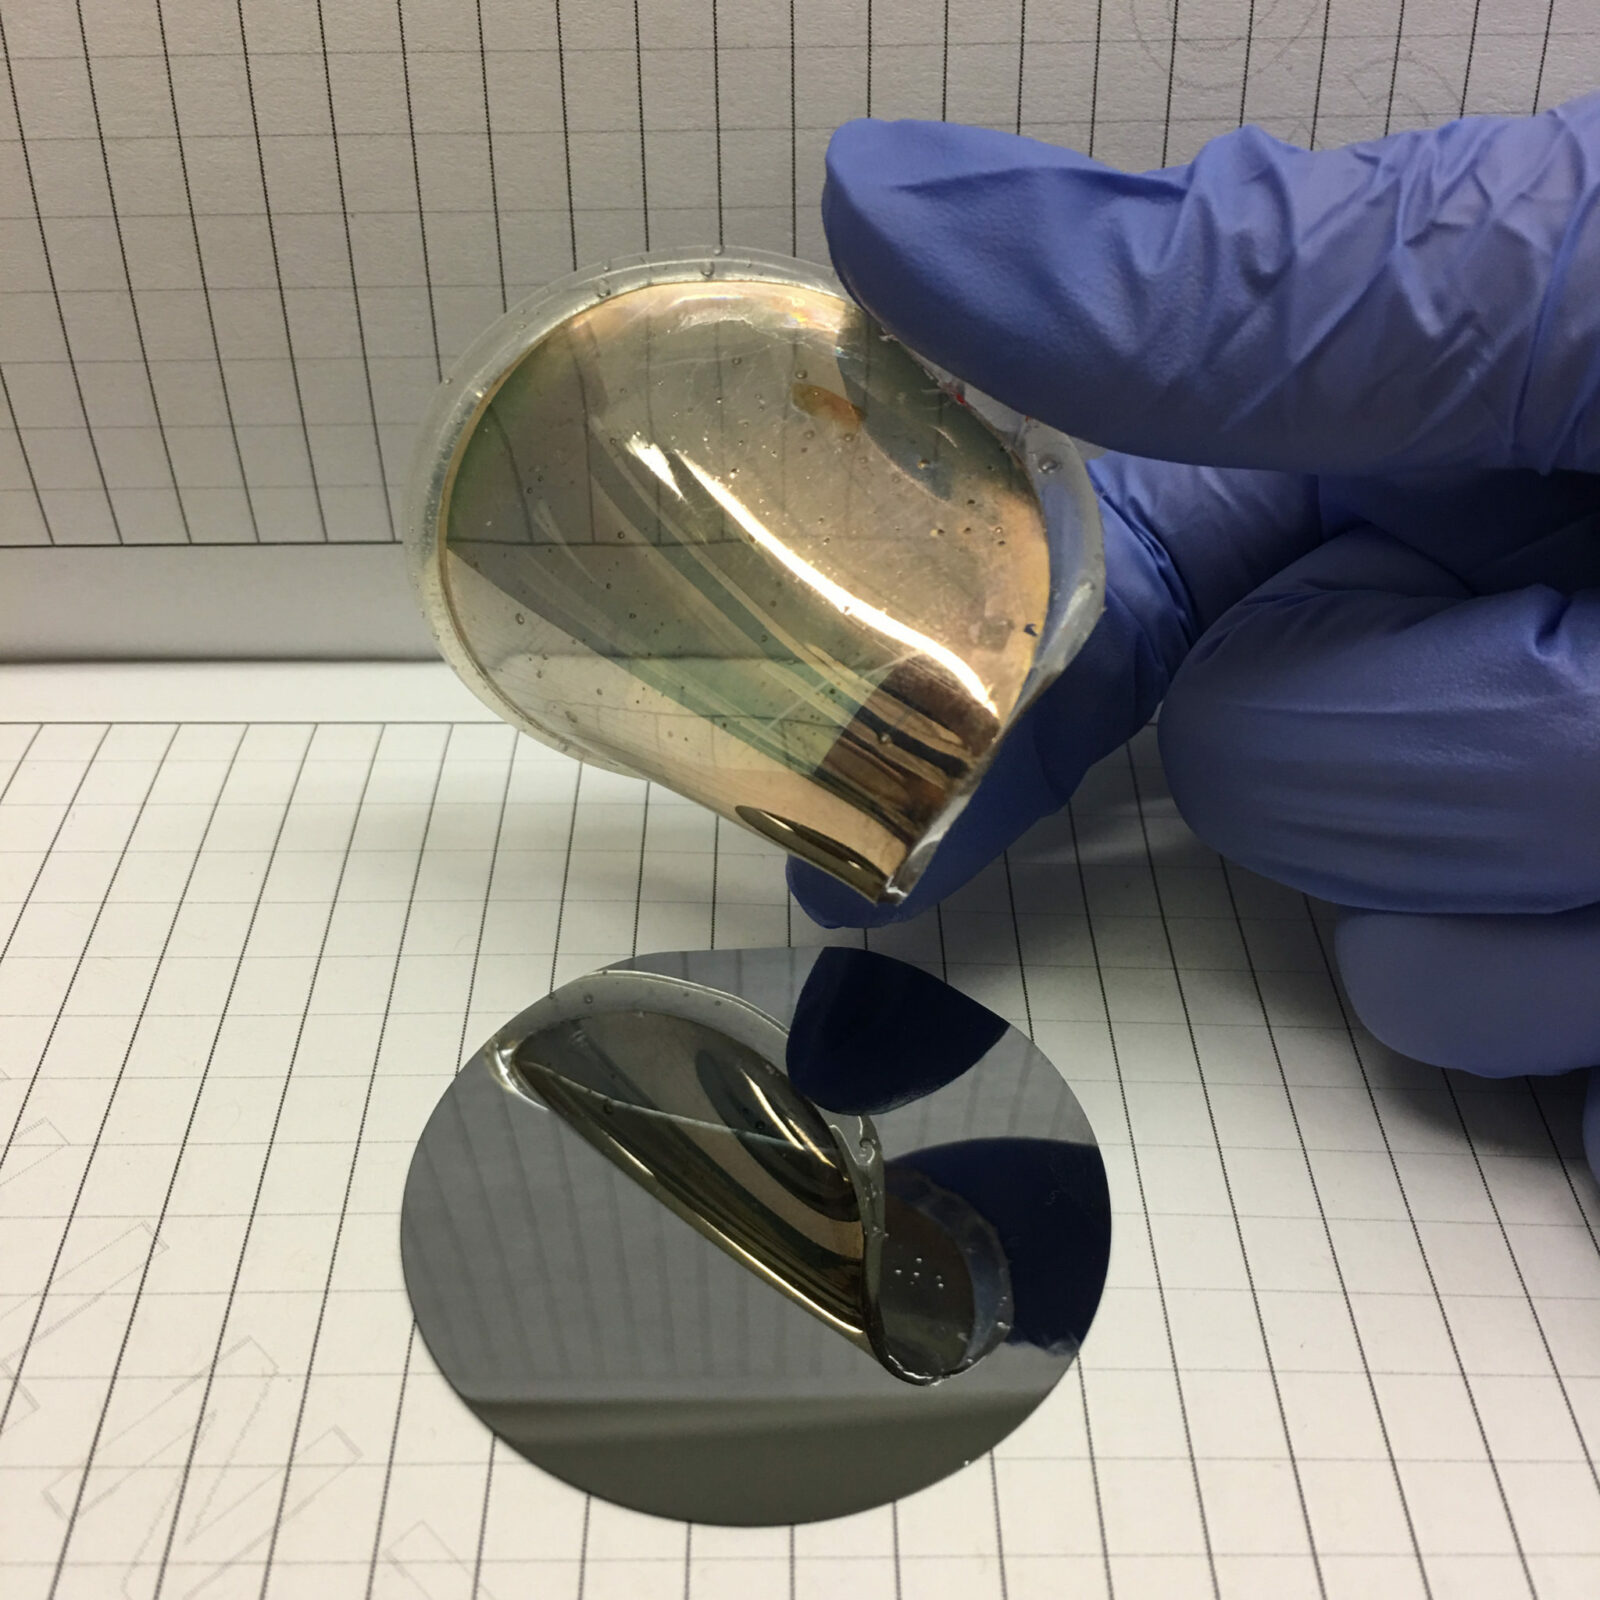 An example of a gold foil peeled from single crystal silicon. Reprinted with permission from Naveen Mahenderkar et al., Science [355]:[1203] (2017)